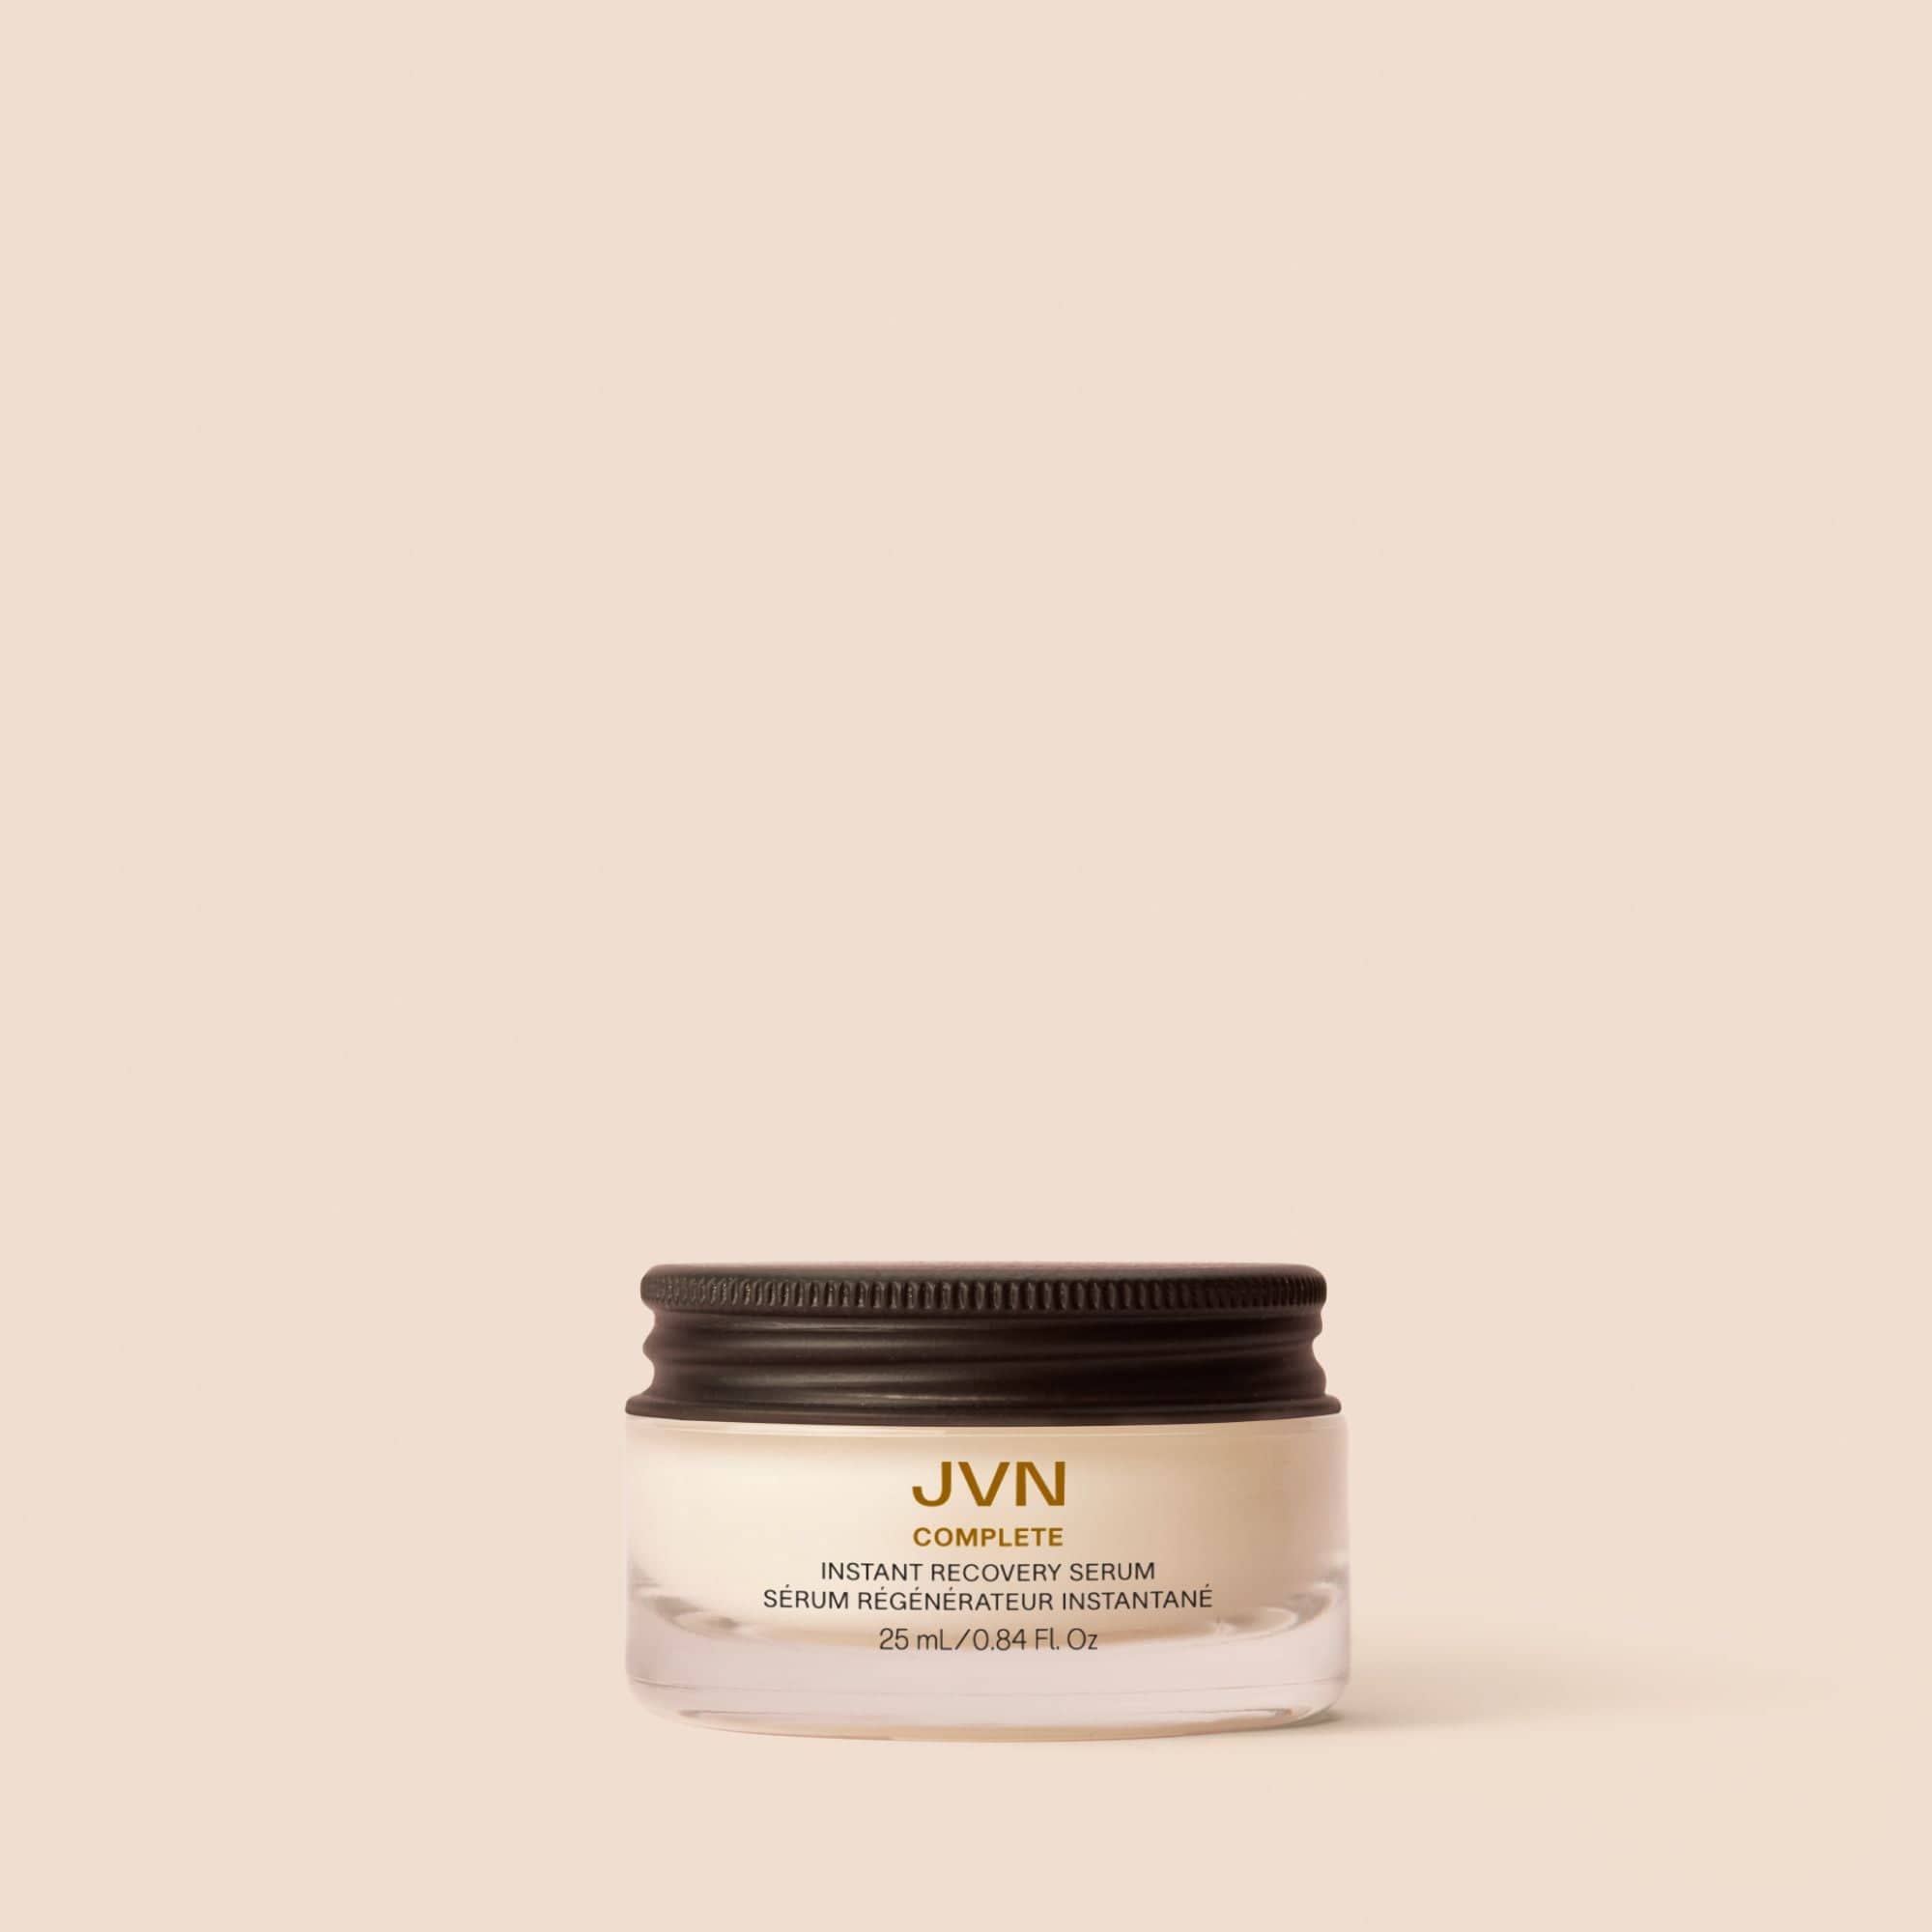 JVN Treatment Complete Instant Recovery Serum Travel Complete Instant Recovery Serum Travel | Hair Heat Protectant | JVN sulfate-free silicone-free sustainable